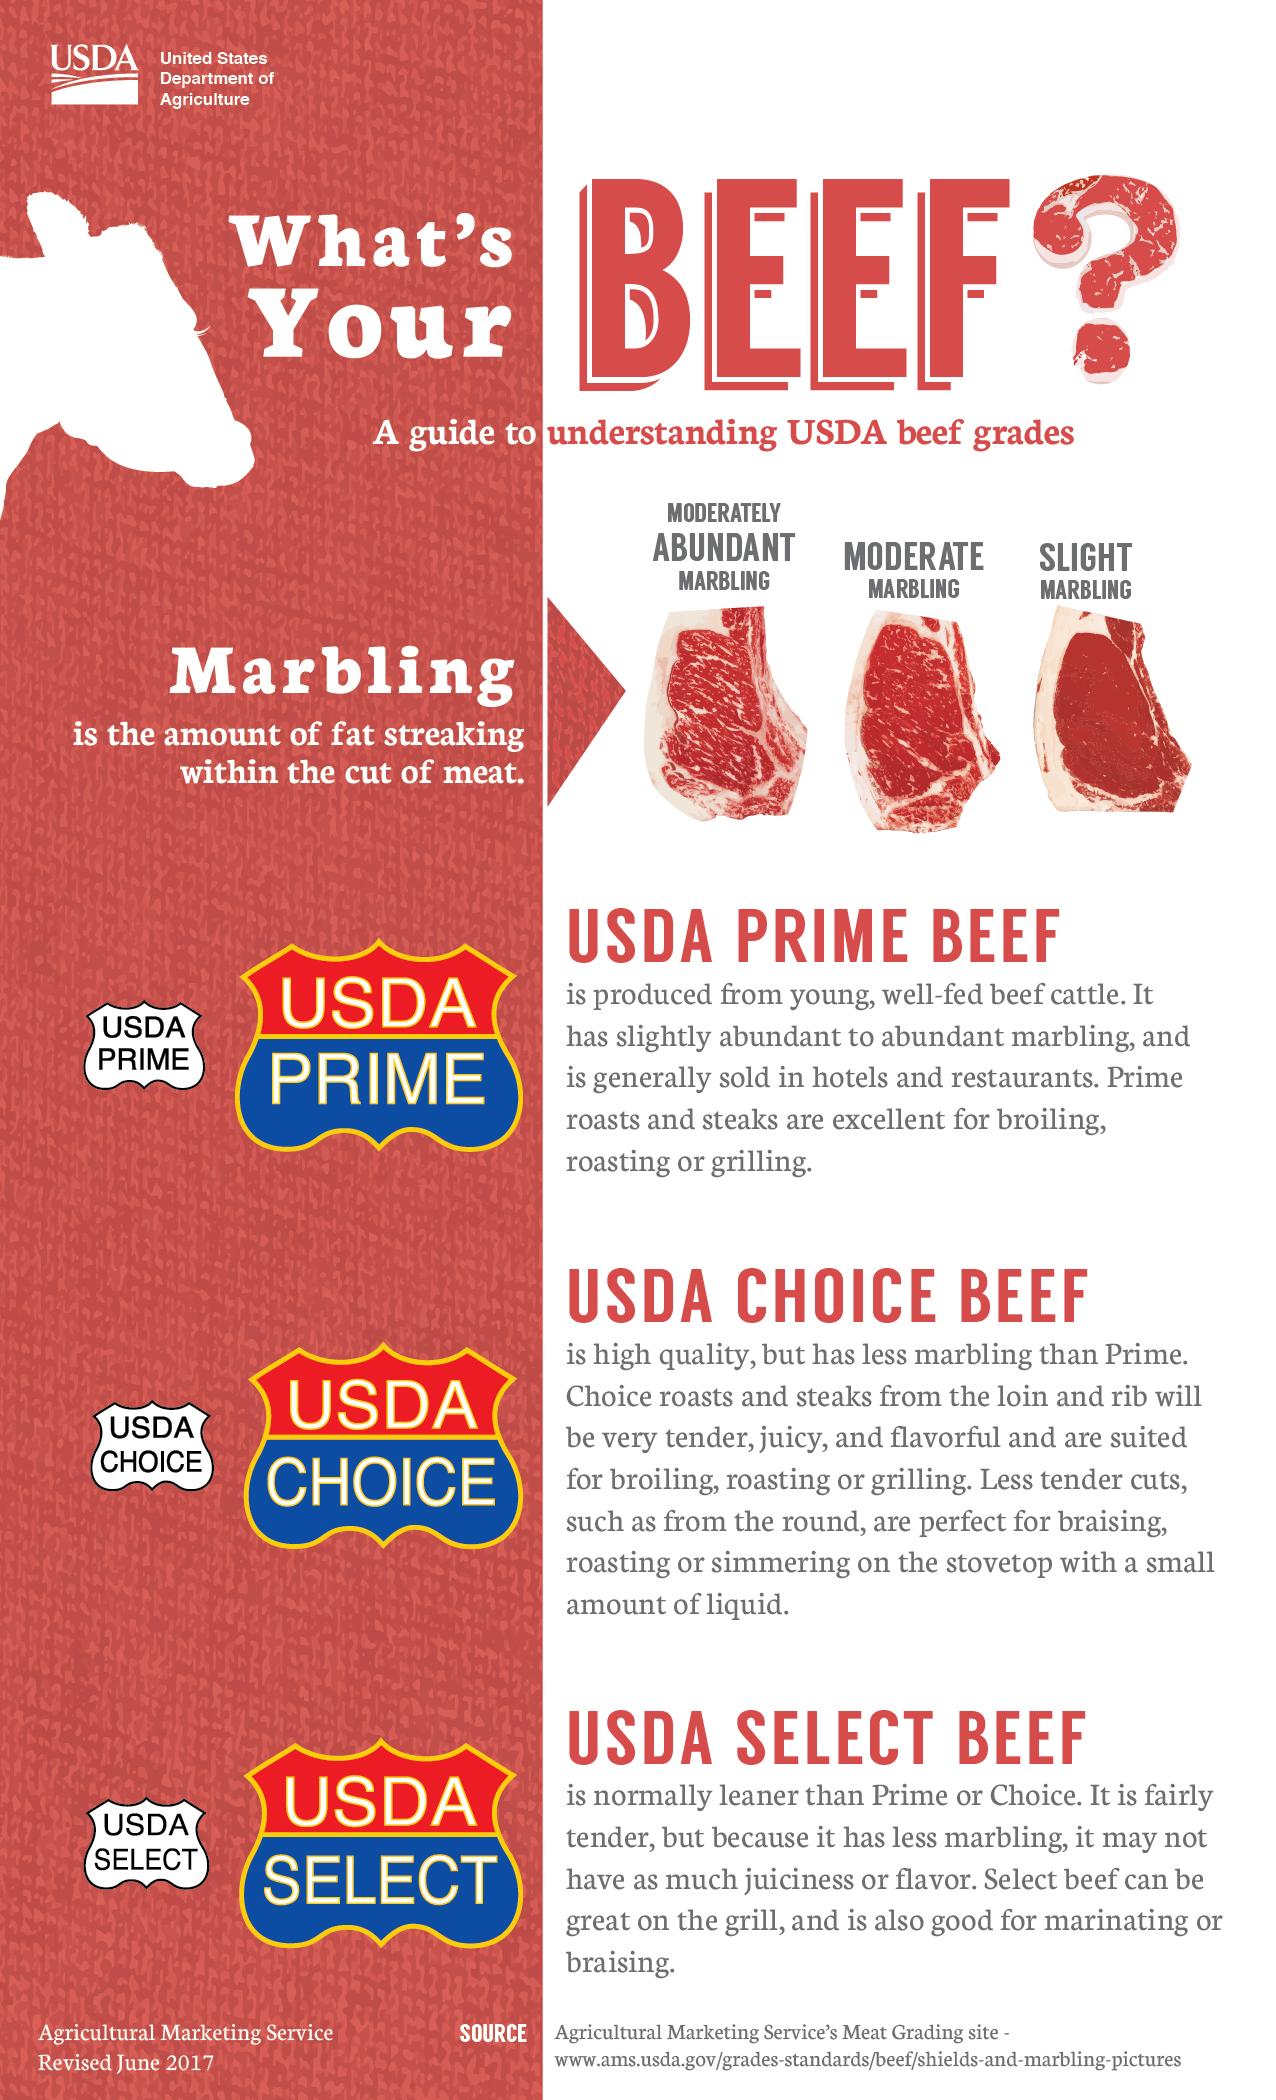 What's Your Beef infographic